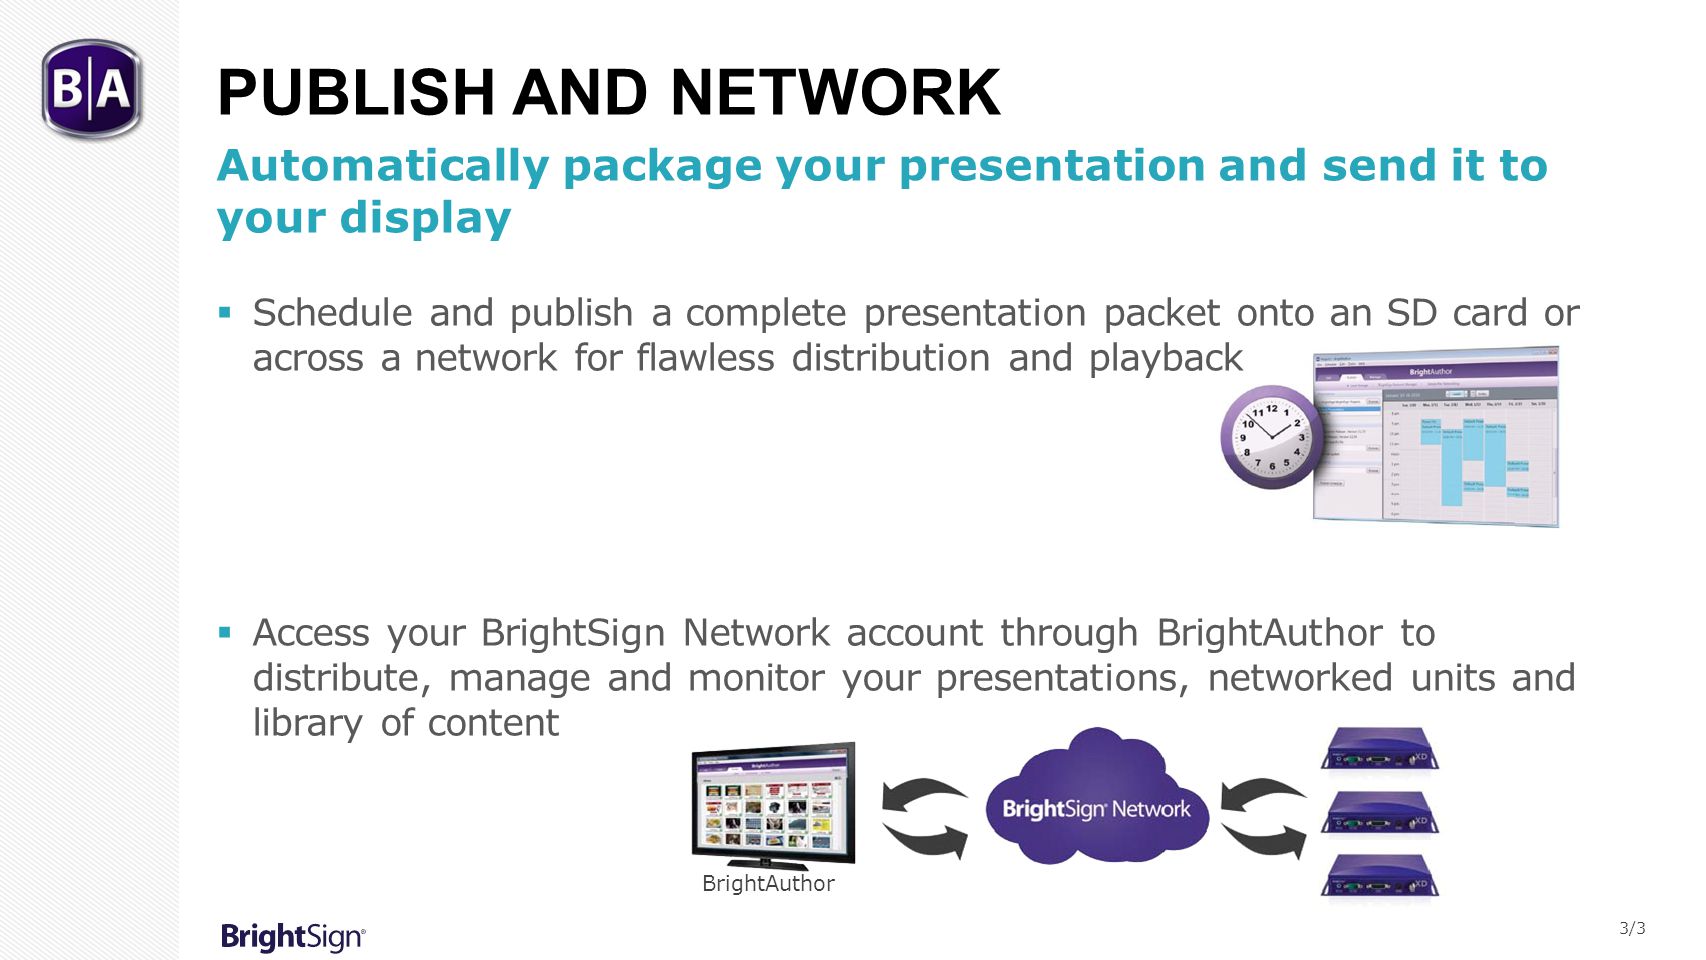 Publish and Network Automatically package your presentation and send it to your display.